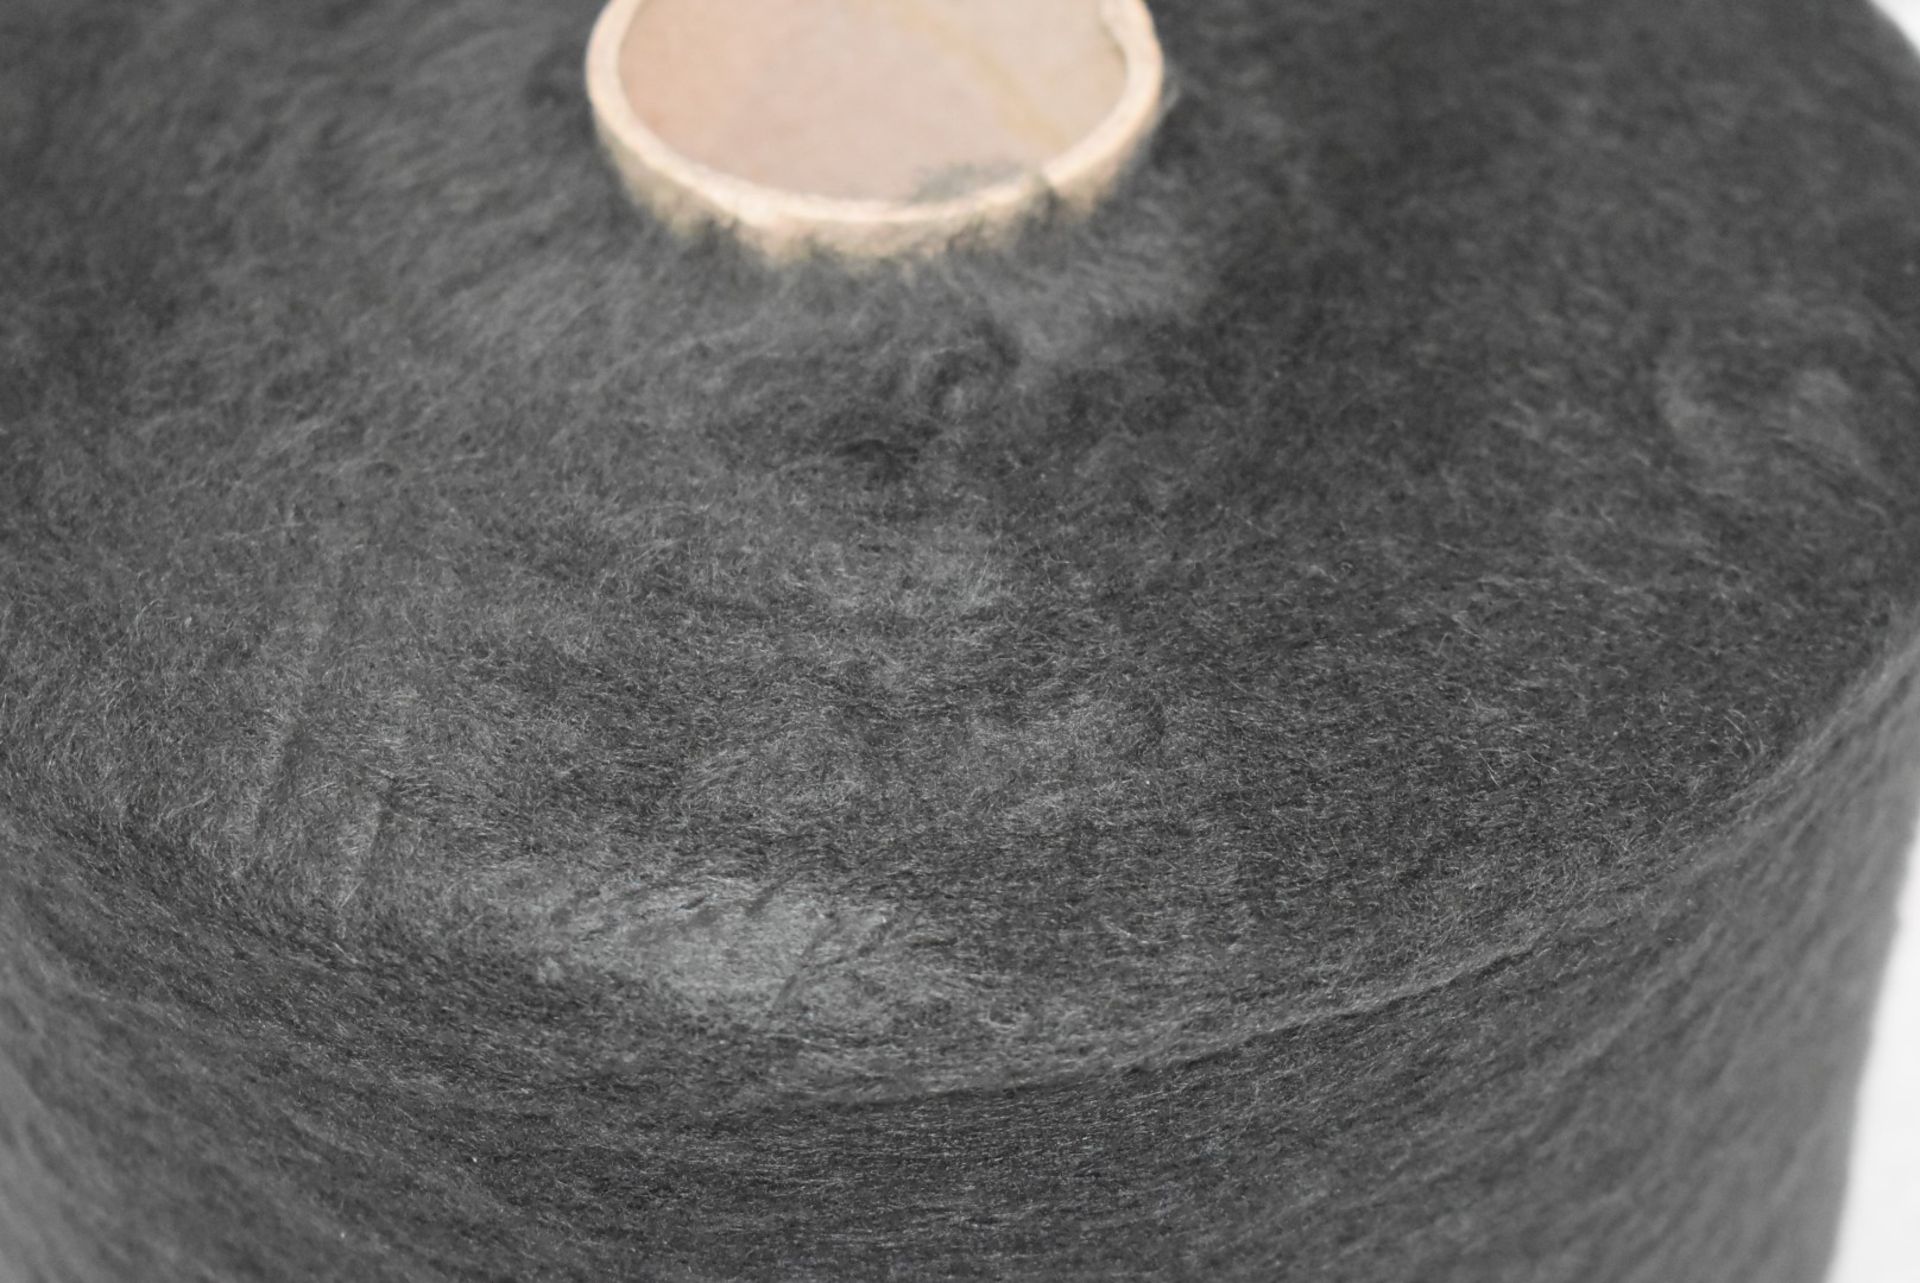 36 x Cones of 1/7,5 Lagona Knitting Yarn - Charcoal - Approx Weight: 2,300g - New Stock ABL Yarn - Image 8 of 11